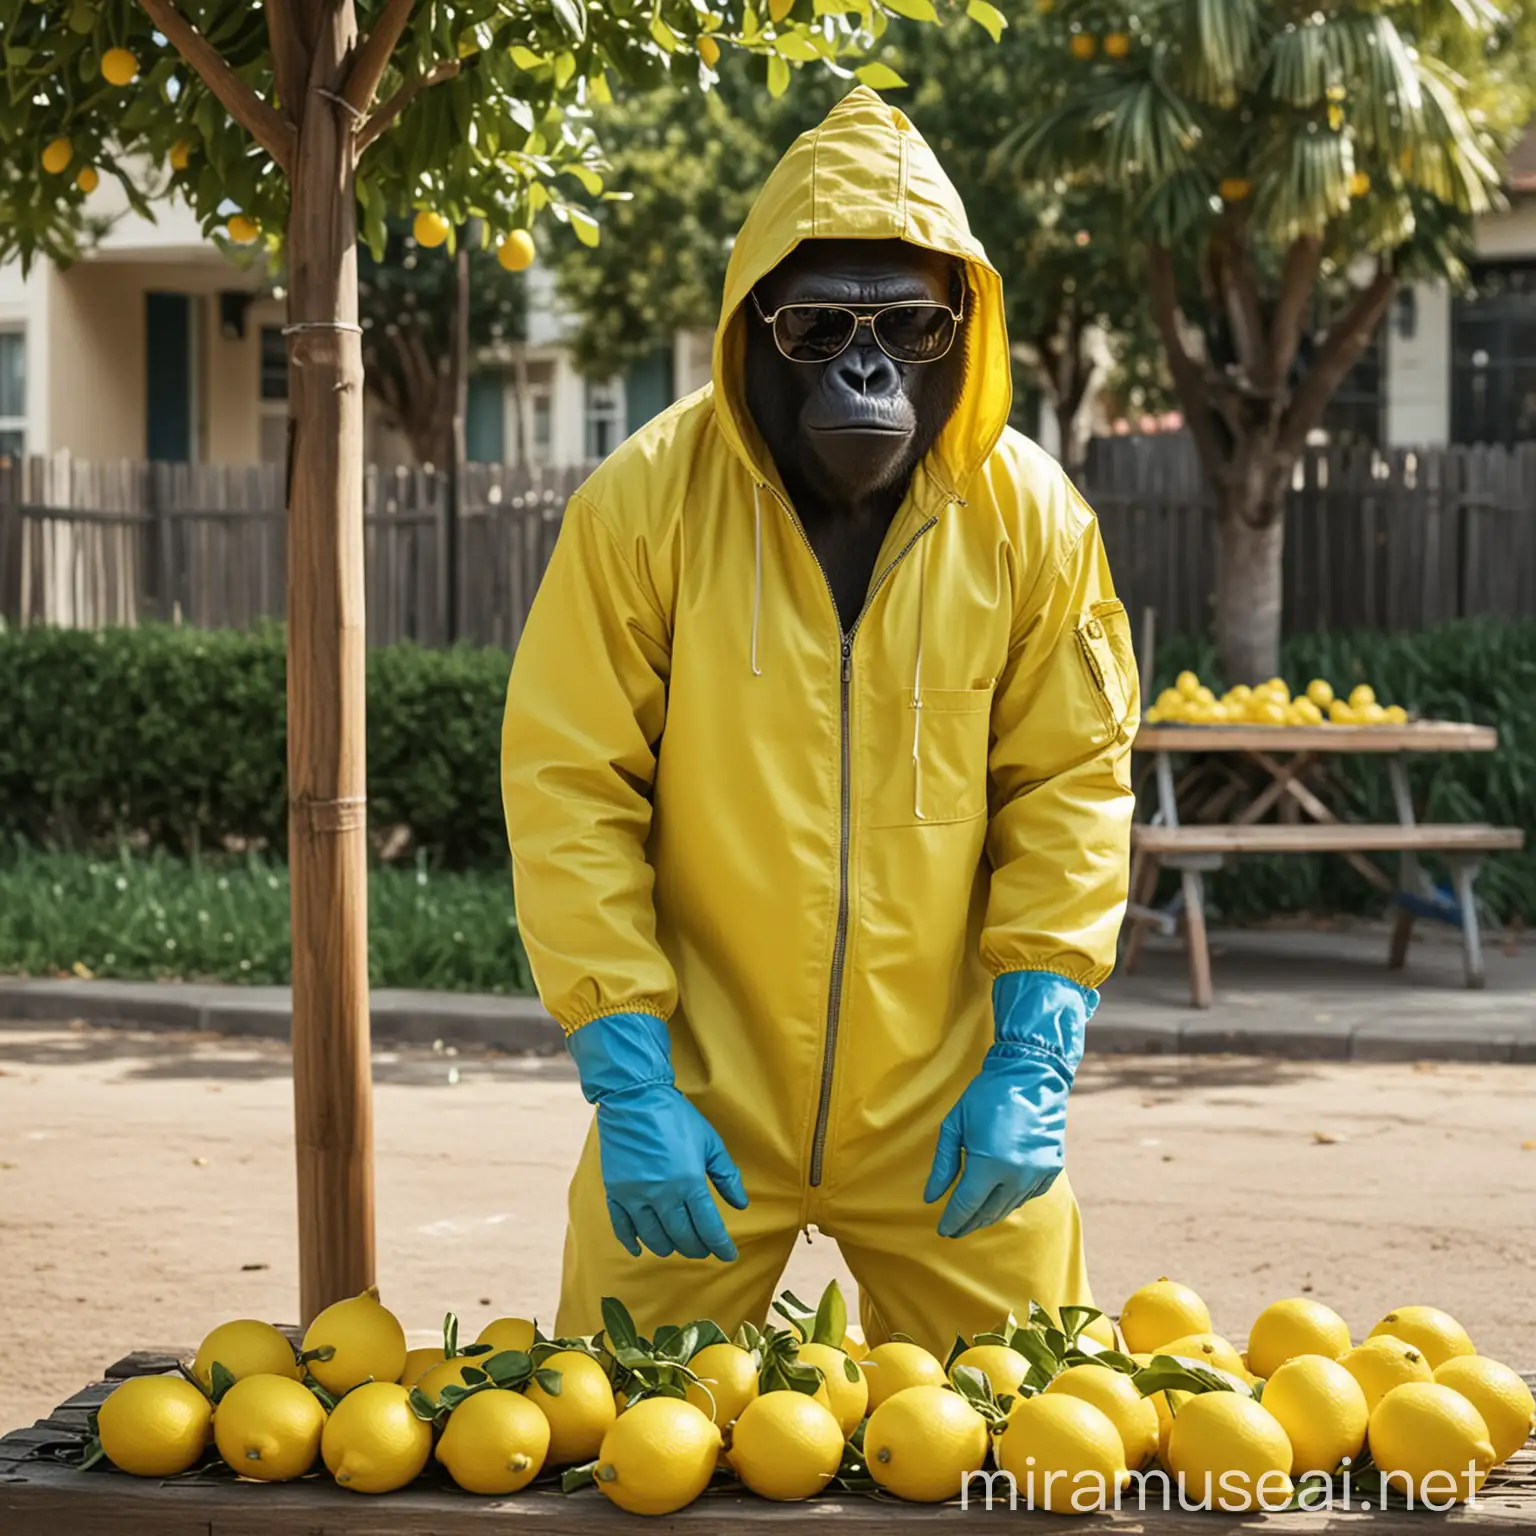 Breaking Bad Gorilla Lemonade Stand Primate in Yellow Jumpsuit and Shades